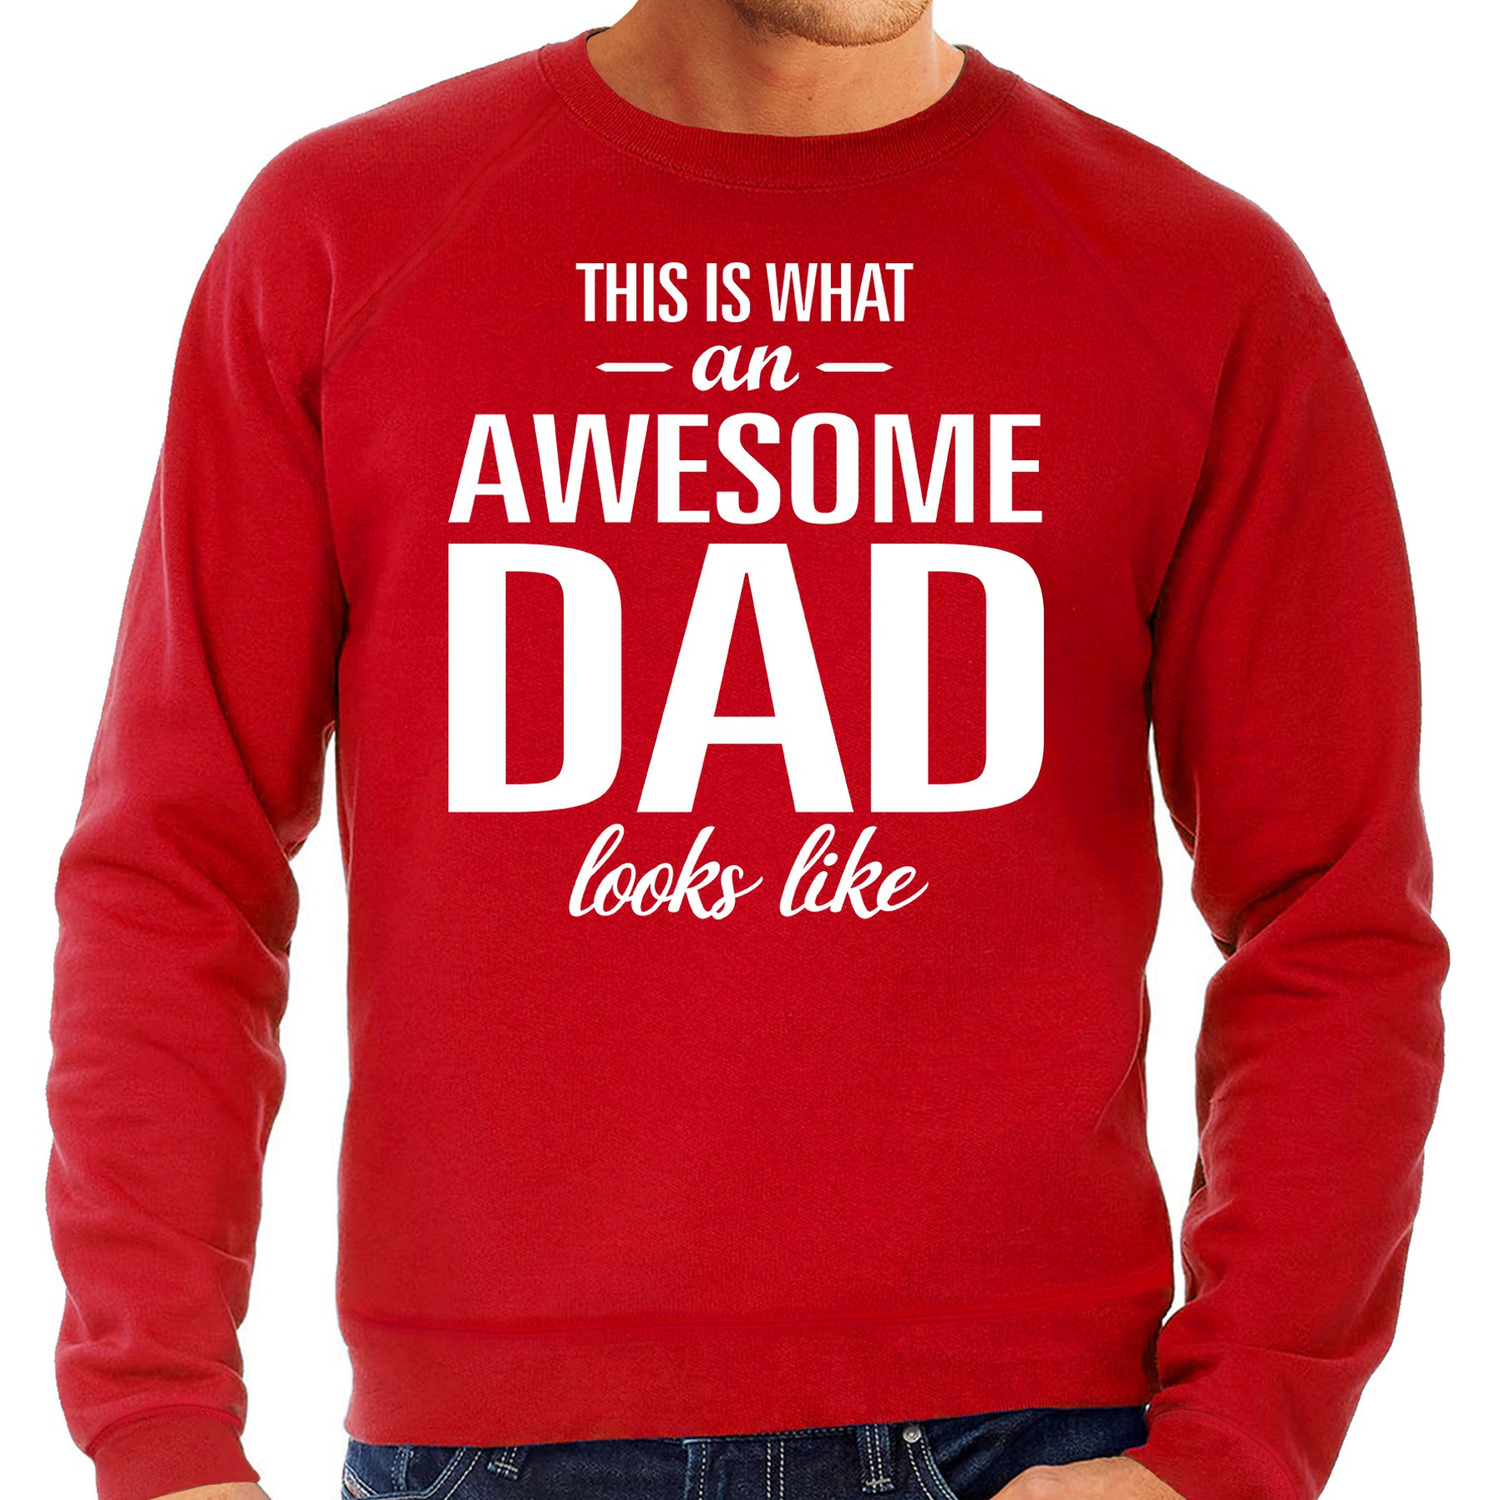 Awesome Dad-vader cadeau sweater rood voor heren